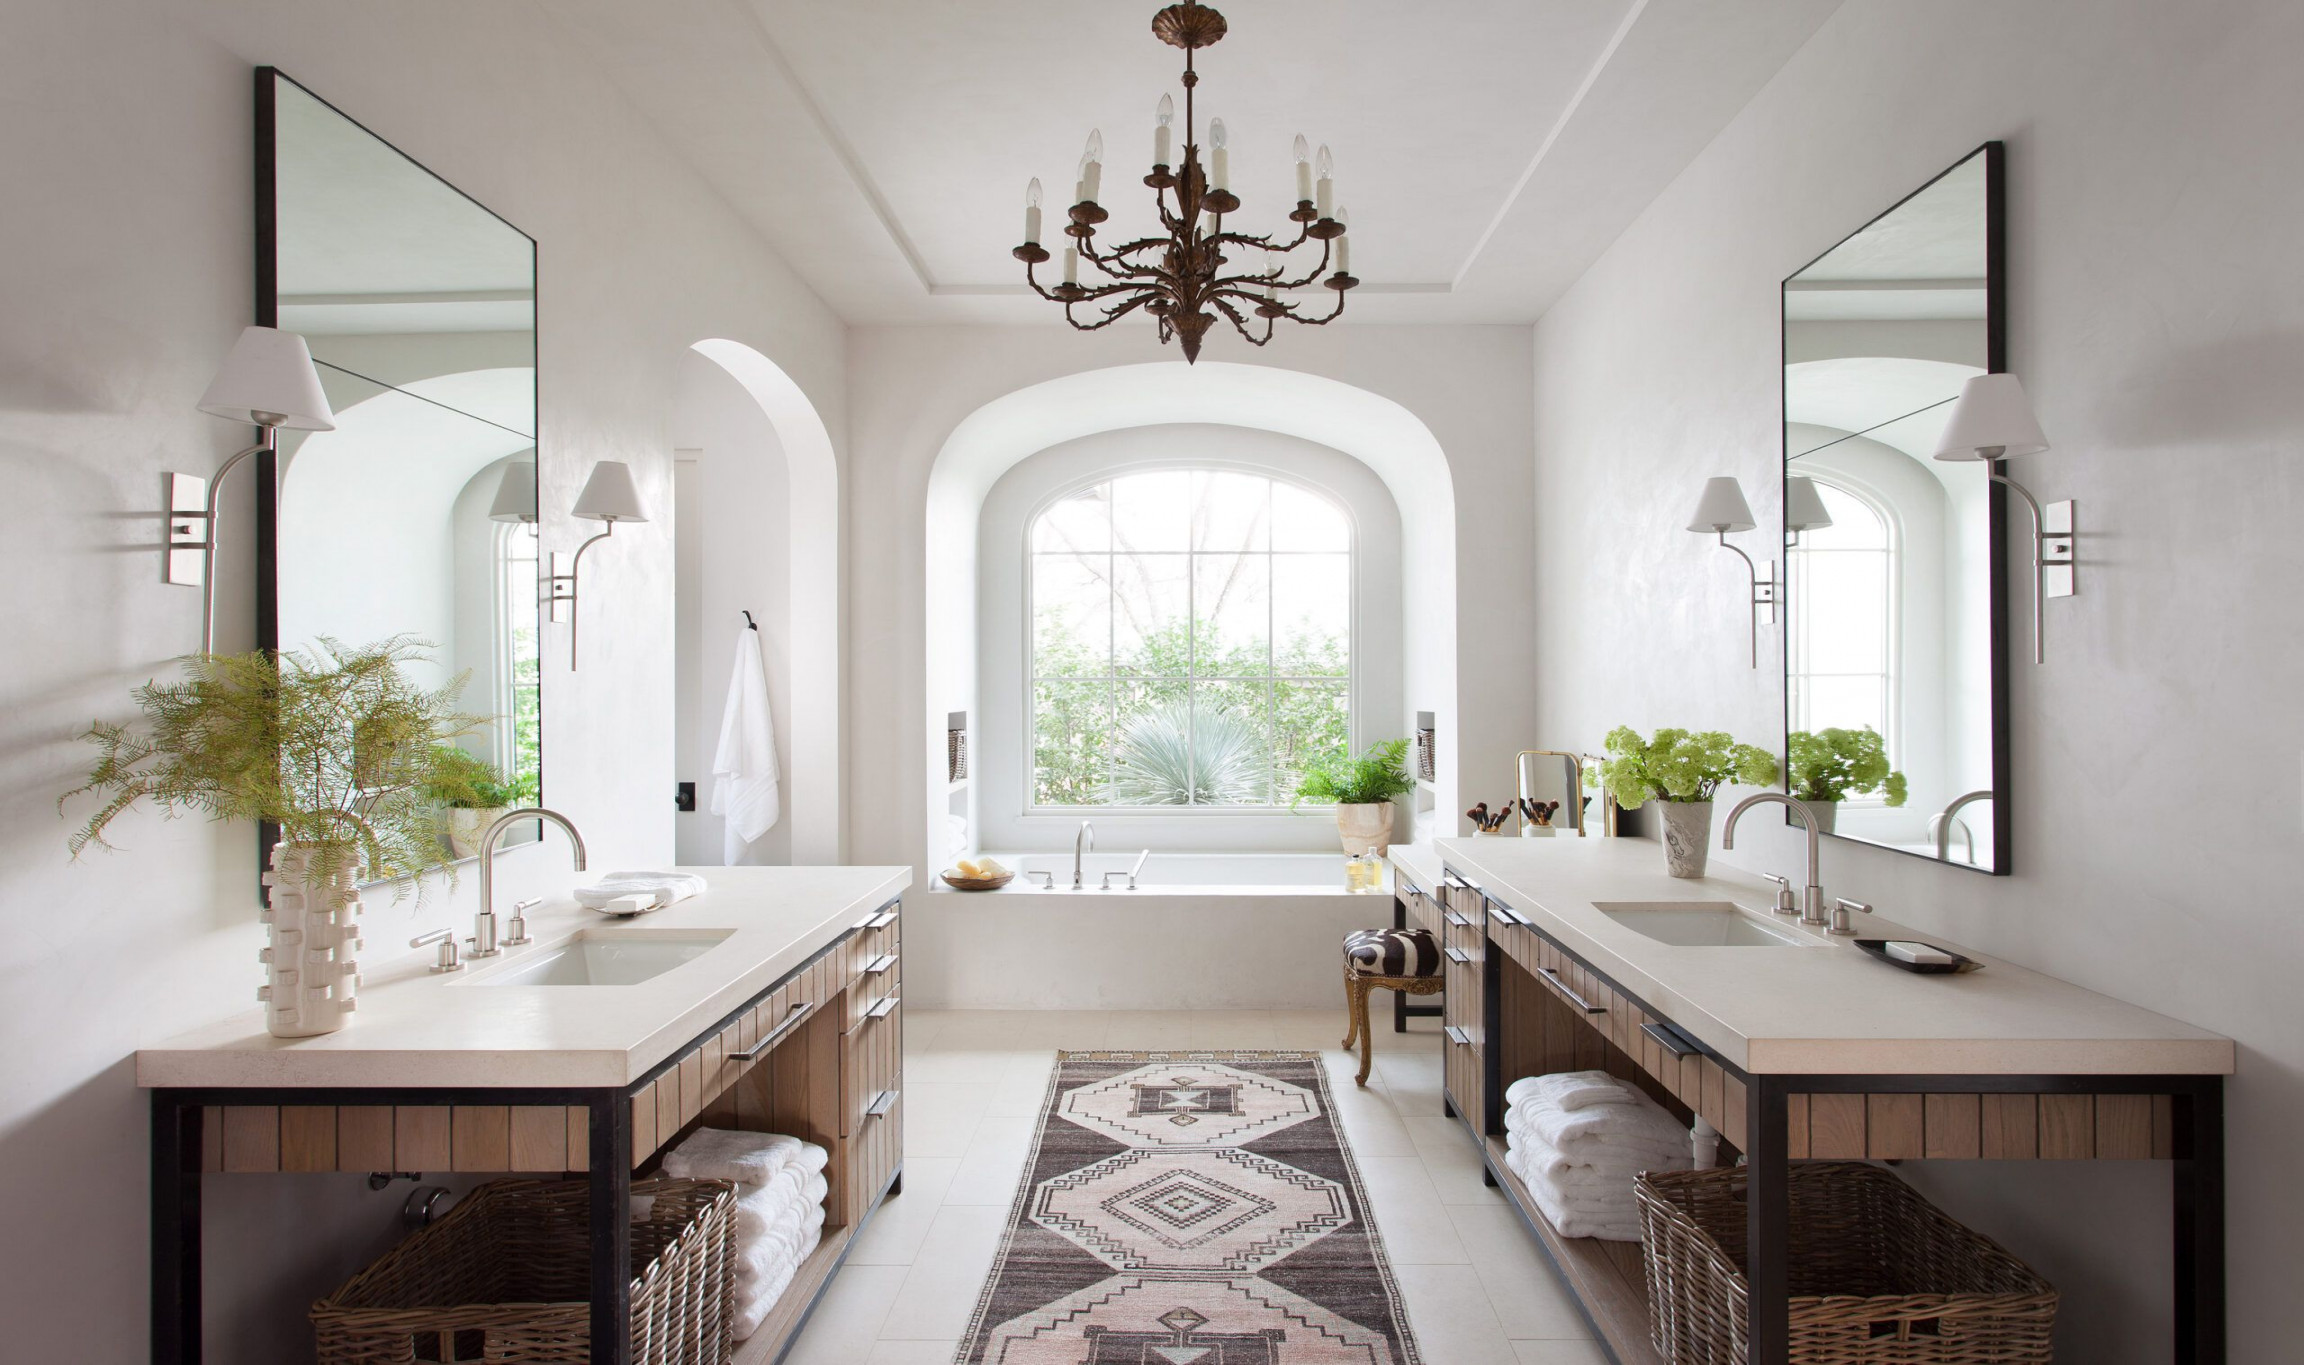 All About Bathroom Chandeliers: Installation, Placement, & Styles